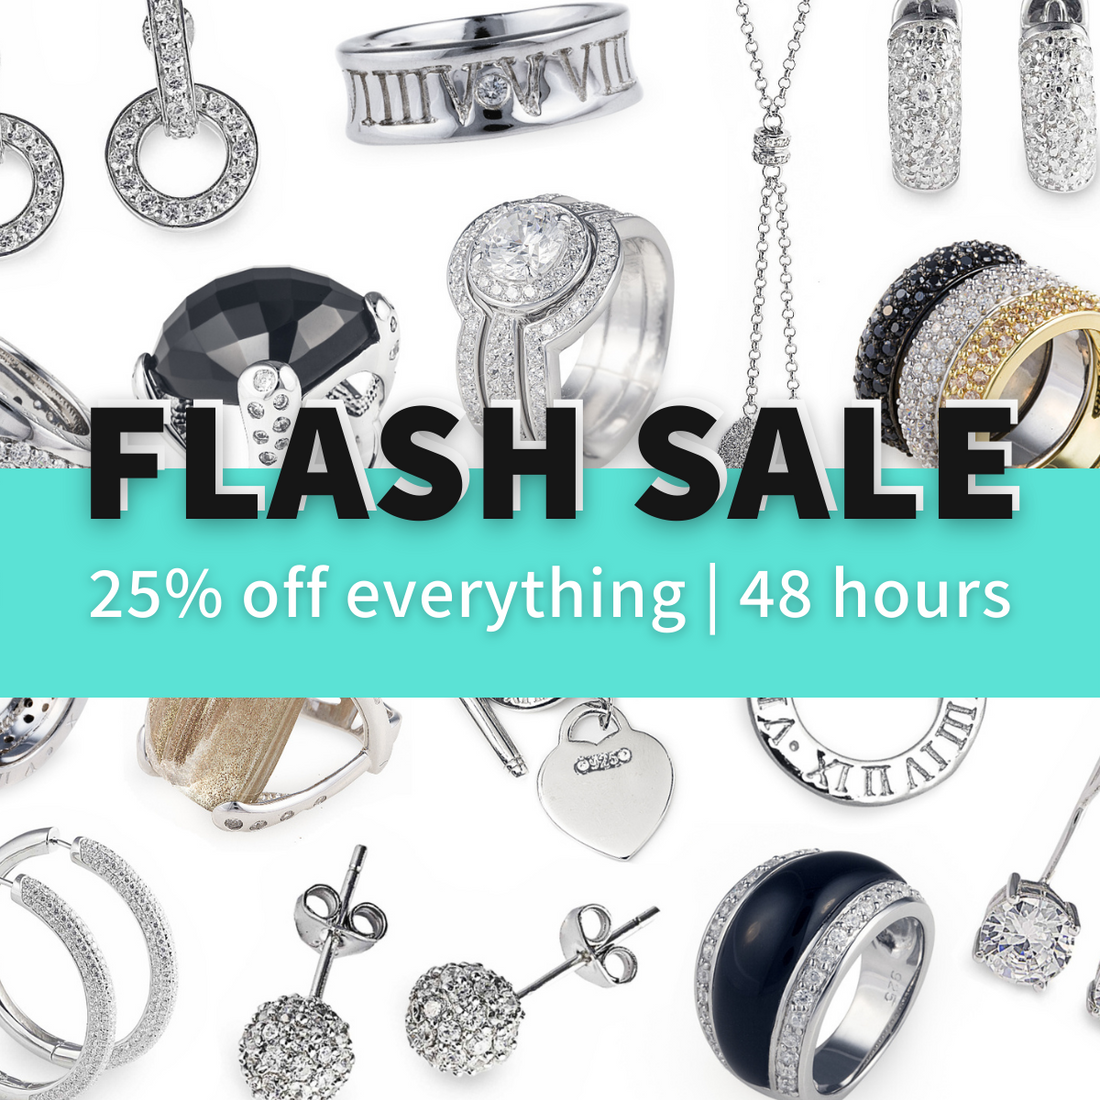 We're celebrating the launch of our new website and sharing some happiness with a huge flash sale. Enjoy 25% off all jewellery. Sale ends 24 Feb 22, 8pm AEDT